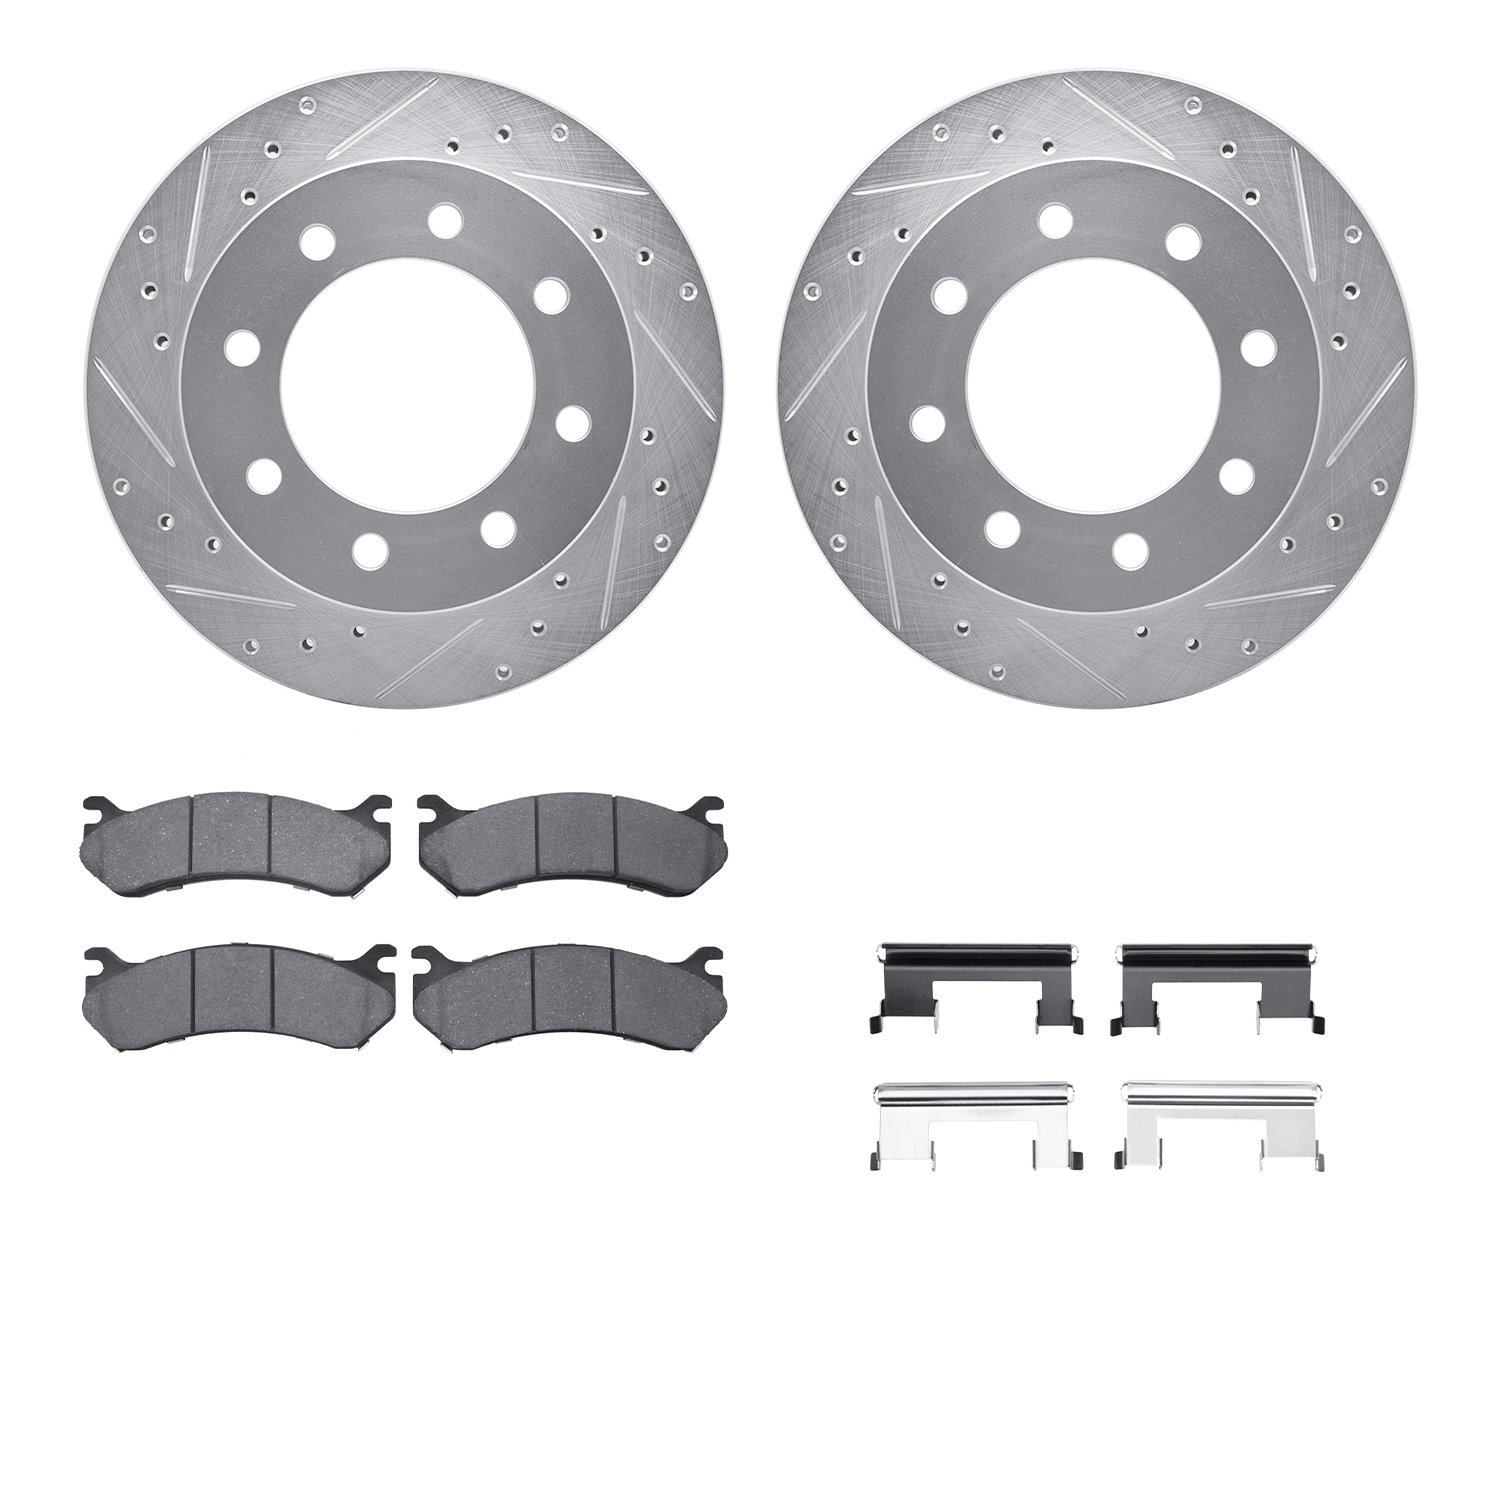 7412-48027 Drilled/Slotted Brake Rotors with Ultimate-Duty Brake Pads Kit & Hardware [Silver], 1999-2013 GM, Position: Rear